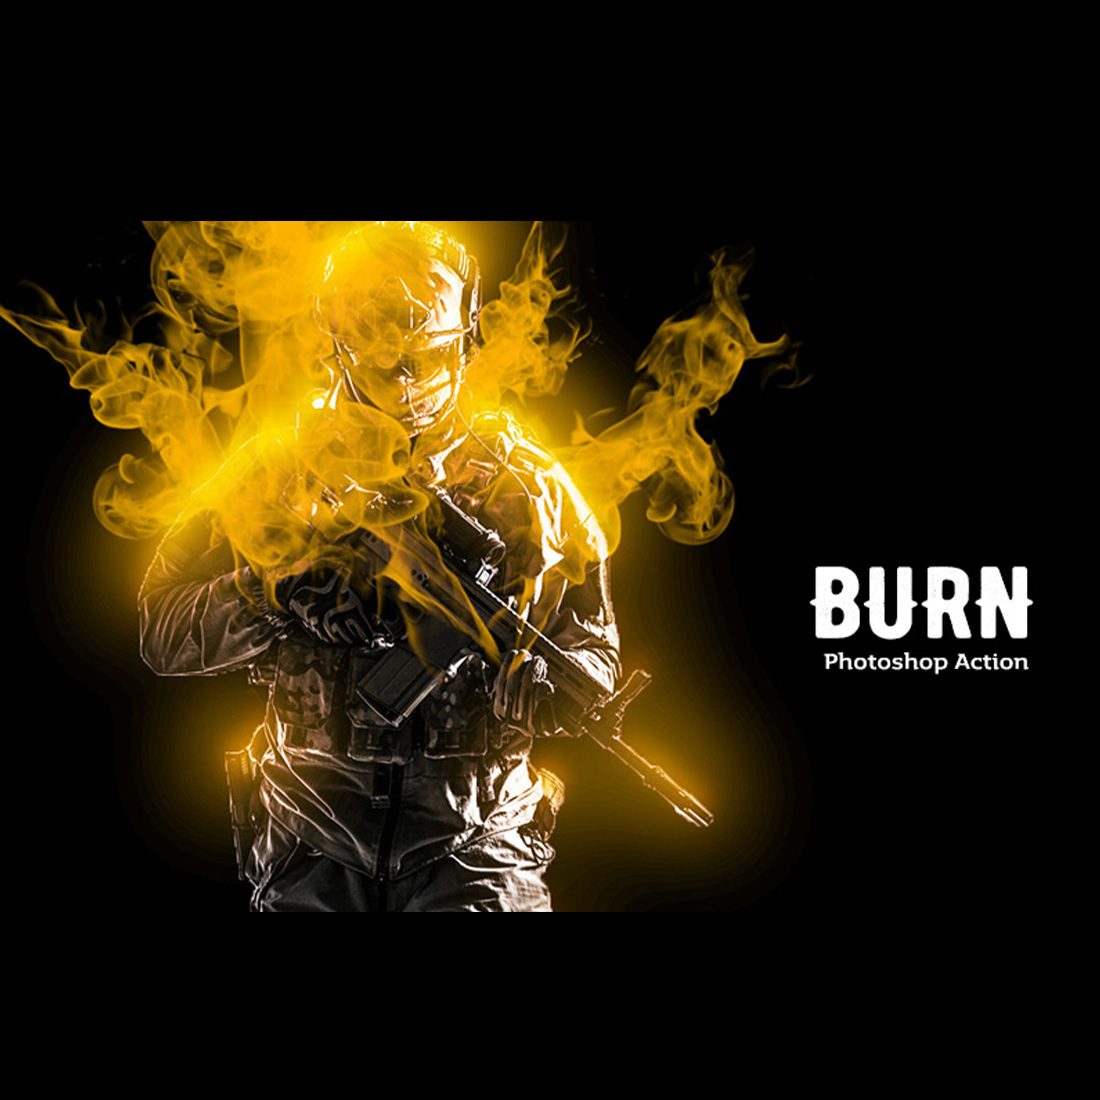 Burn Photoshop Action cover image.